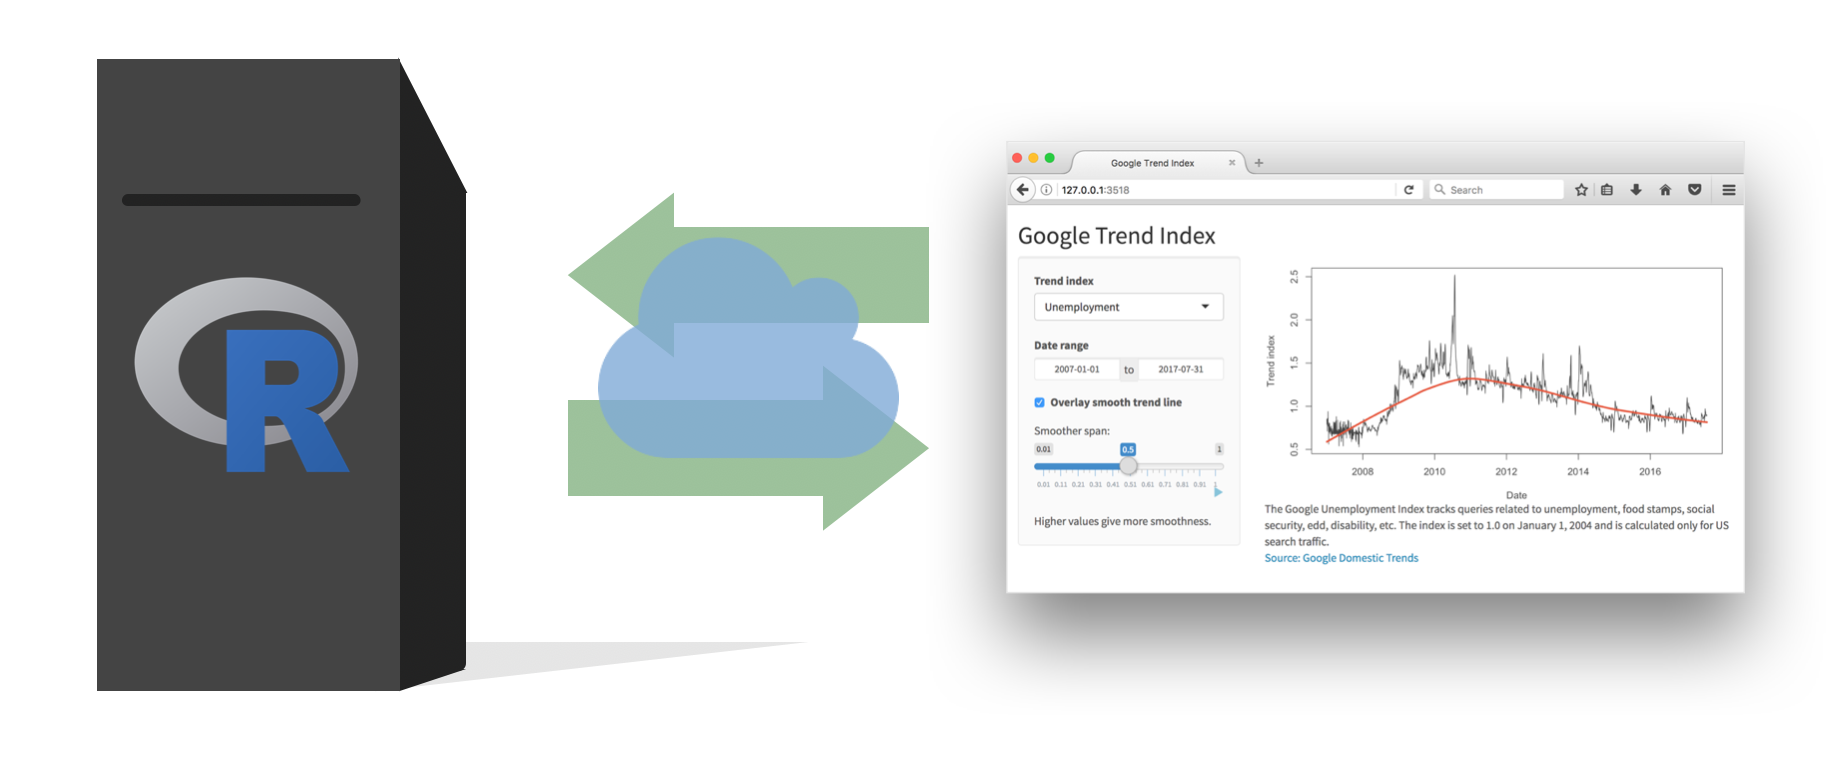 Image of R on a web server on the left and arrows going back and forth, and with a picture of a cloud, to an image of a Shiny app on 'Google Trend Index'.